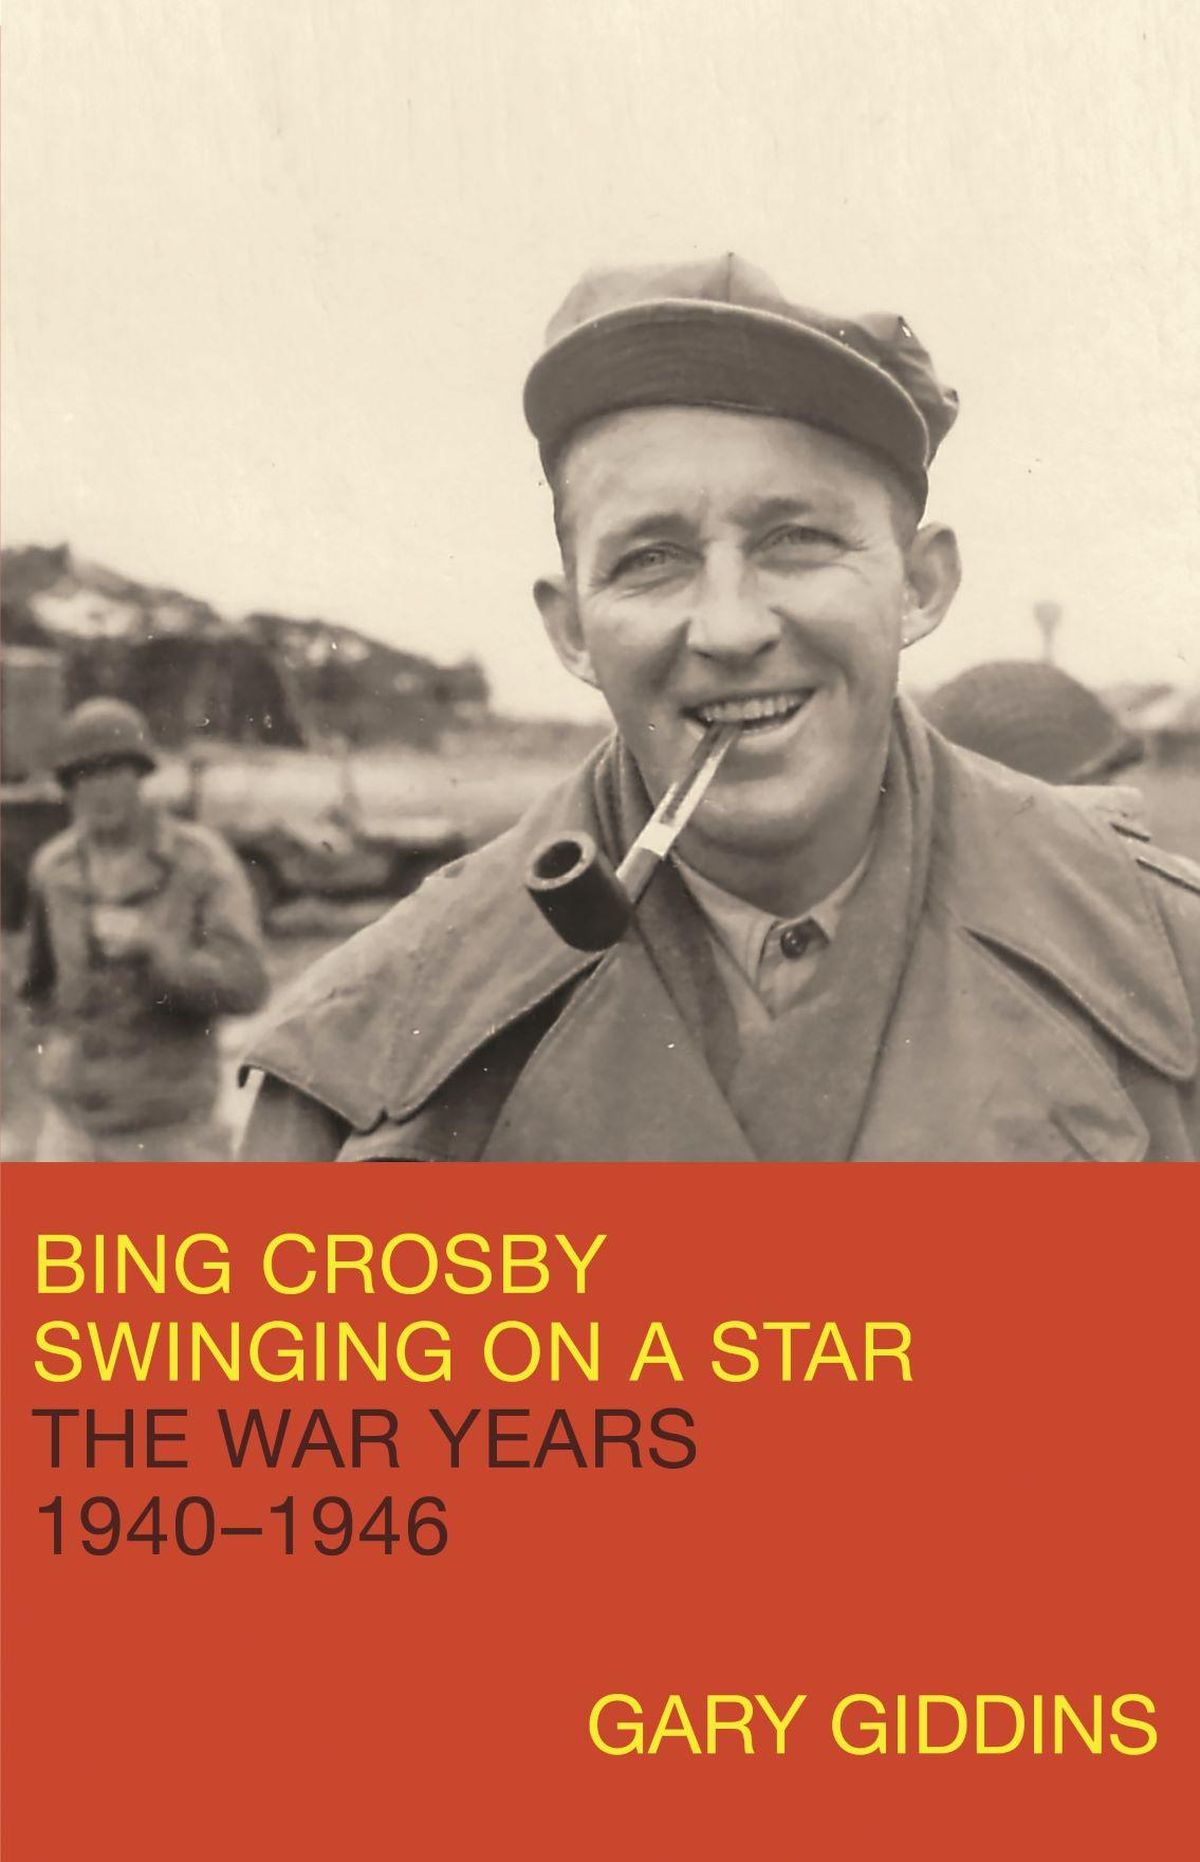 The cover of Gary Giddins’ latest book on Bing Crosby. (Courtesy photo)